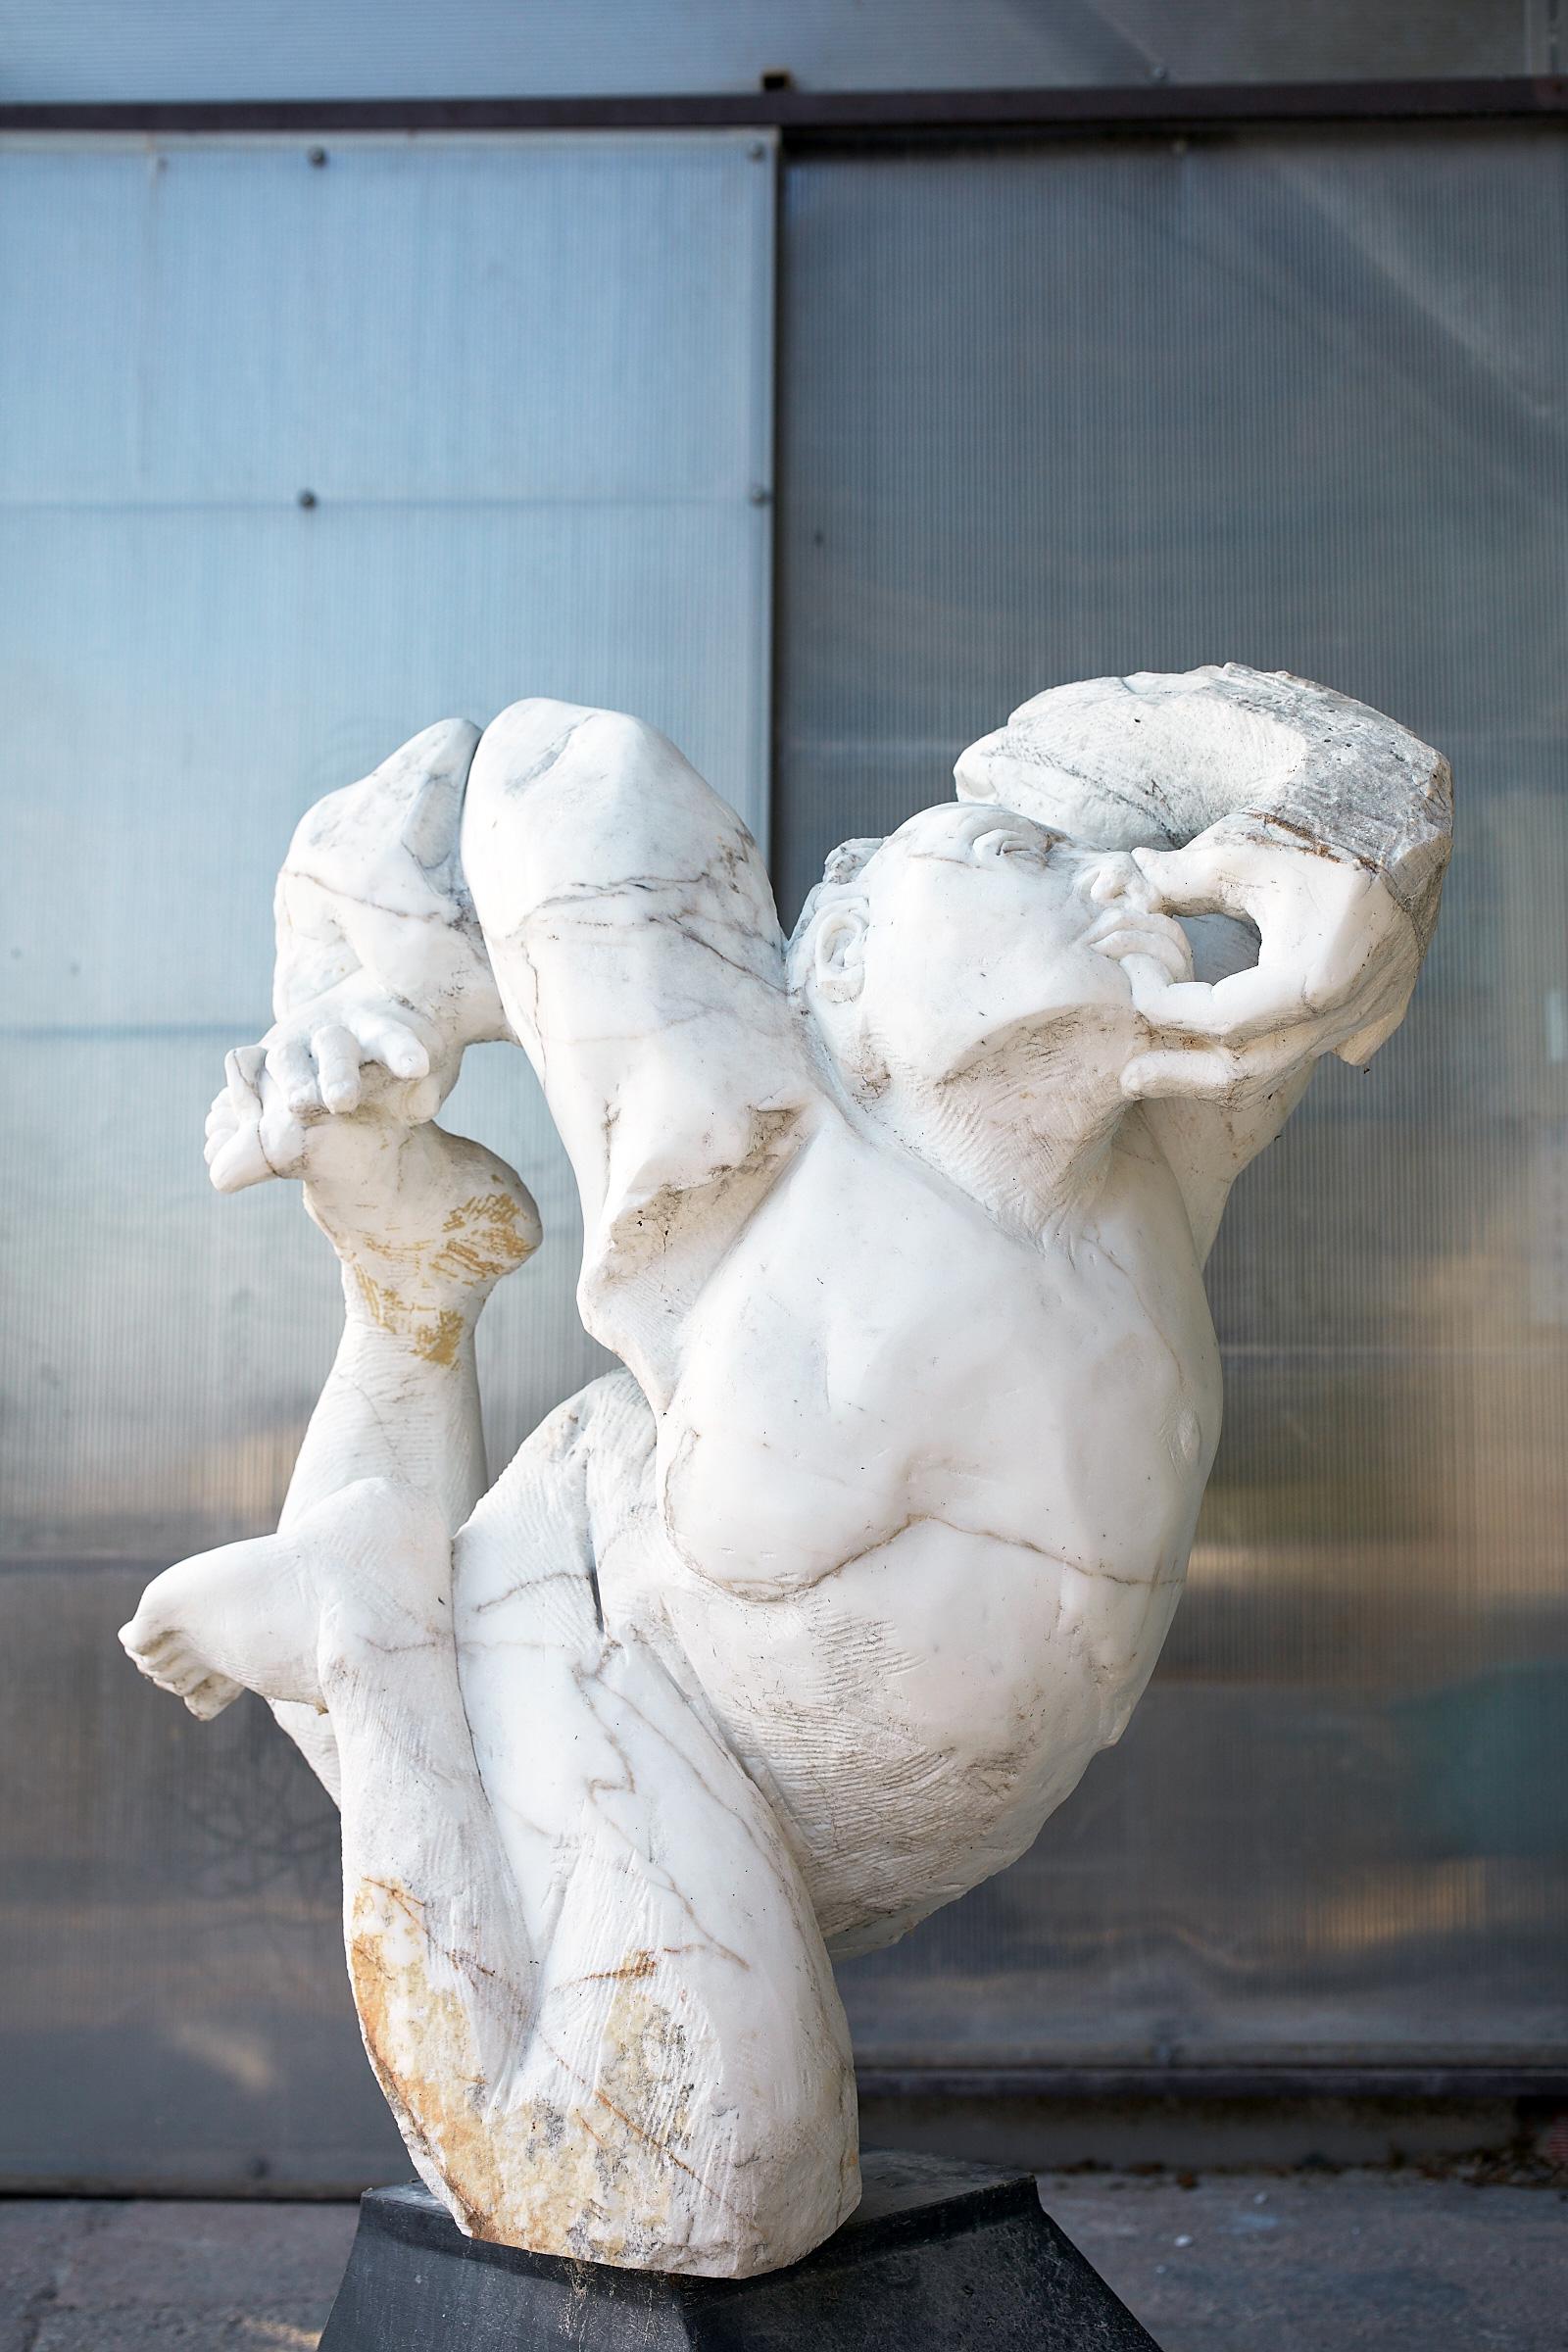 striking hand carved Carrara marble sculpture by contemporary Italian sculptor Lorenzo Vignoli, incorporating classical references and contemporary Mediterranean influences

CONTORSIONISTA by Lorenzo Vignoli (2003)
Carrara, Italy

hand carved